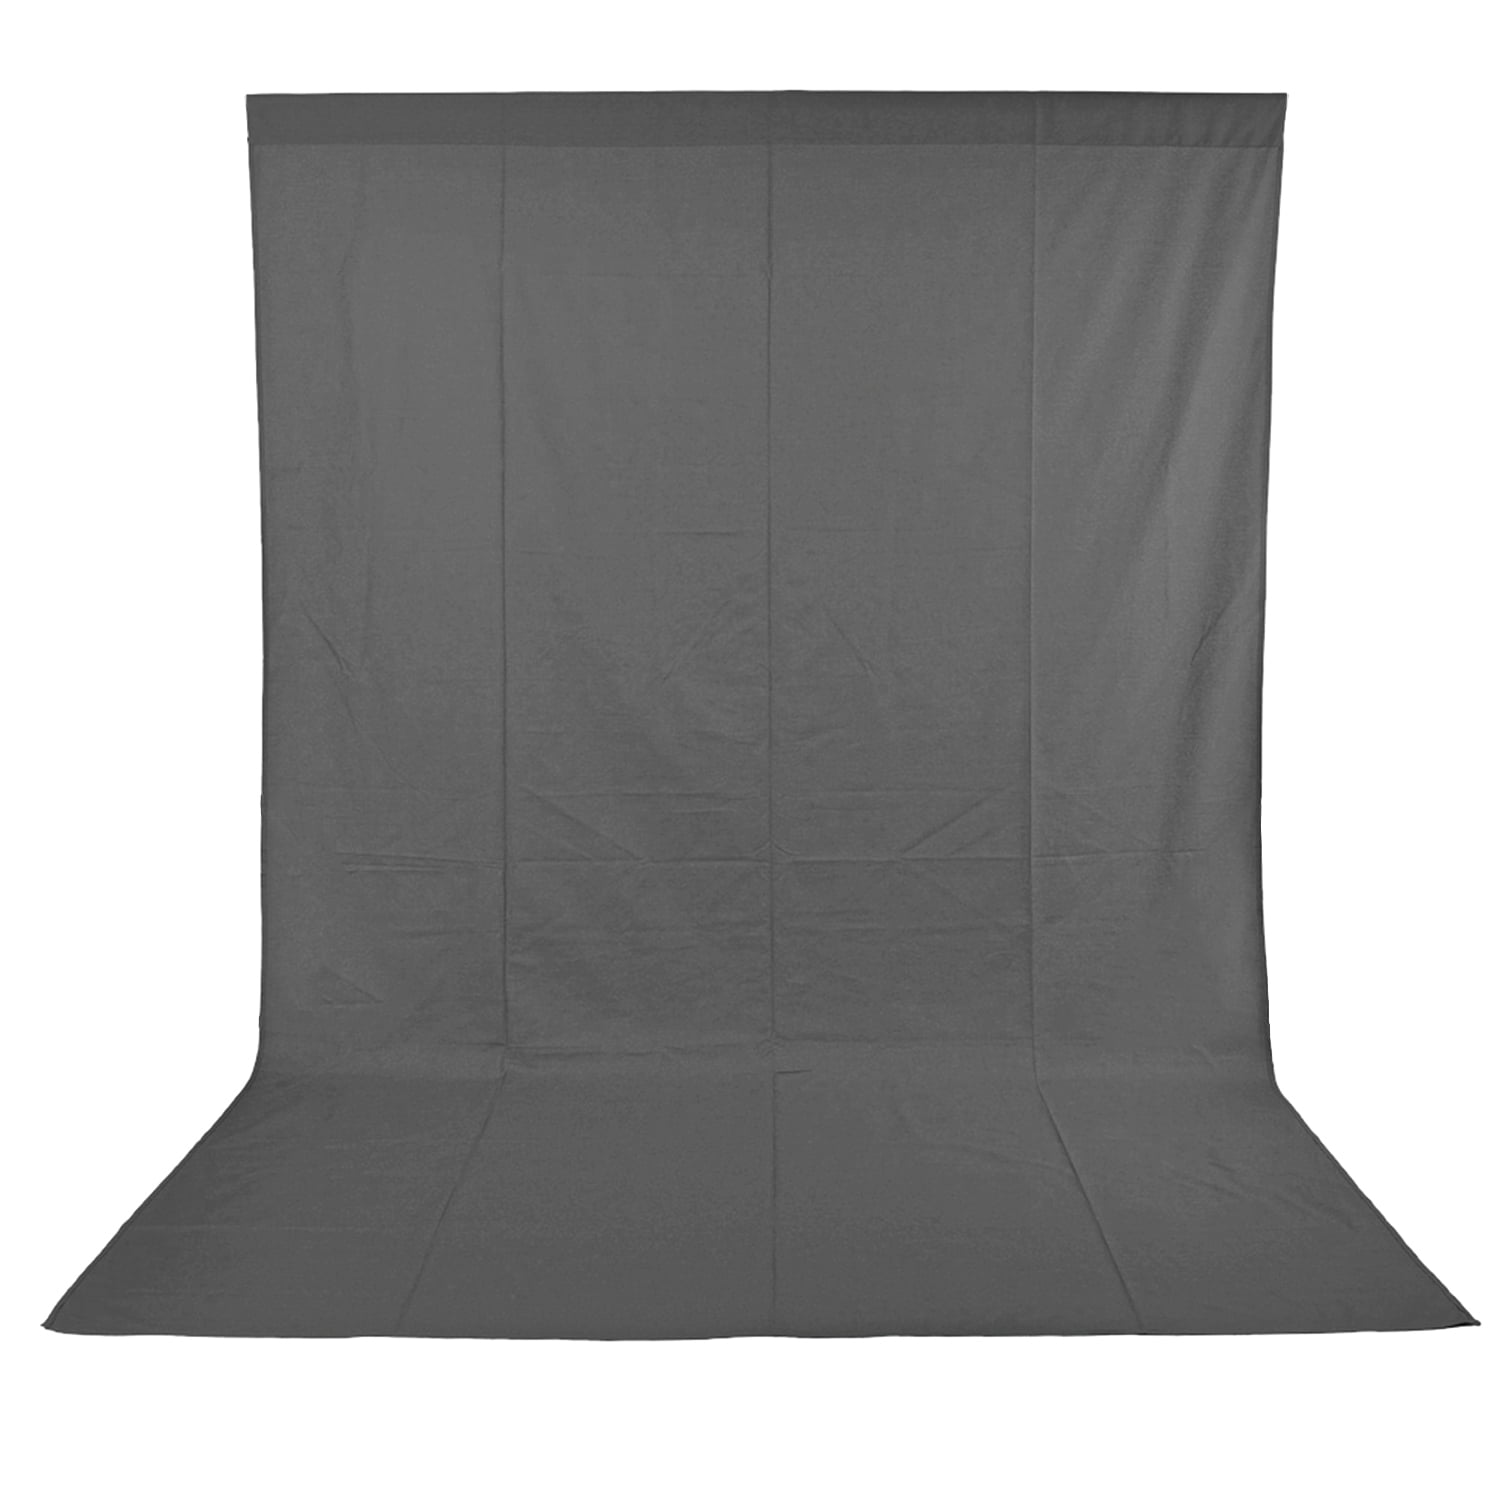 3 x 6M Silk Cotton Cloth Collapsible Background Lightweight Seamless Sheet for Professional Photography Black CRAPHY Photo Studio Backdrop 10 x 20FT